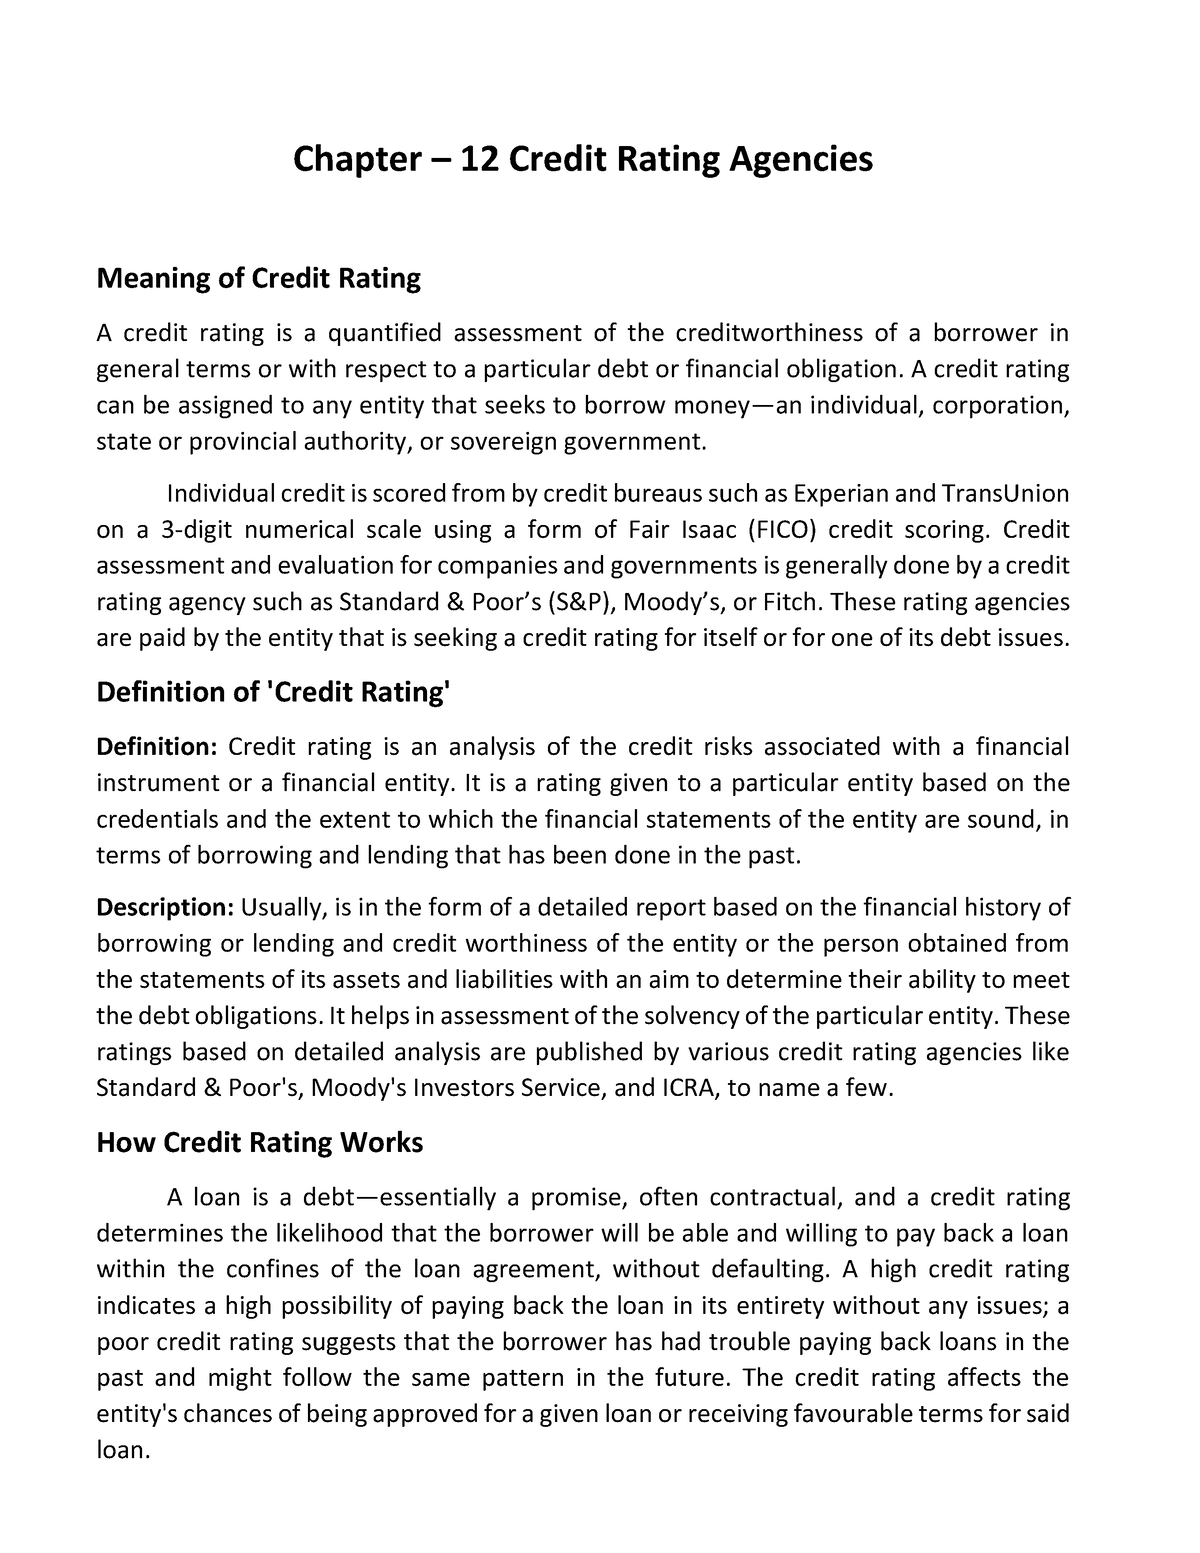 thesis on credit rating agencies